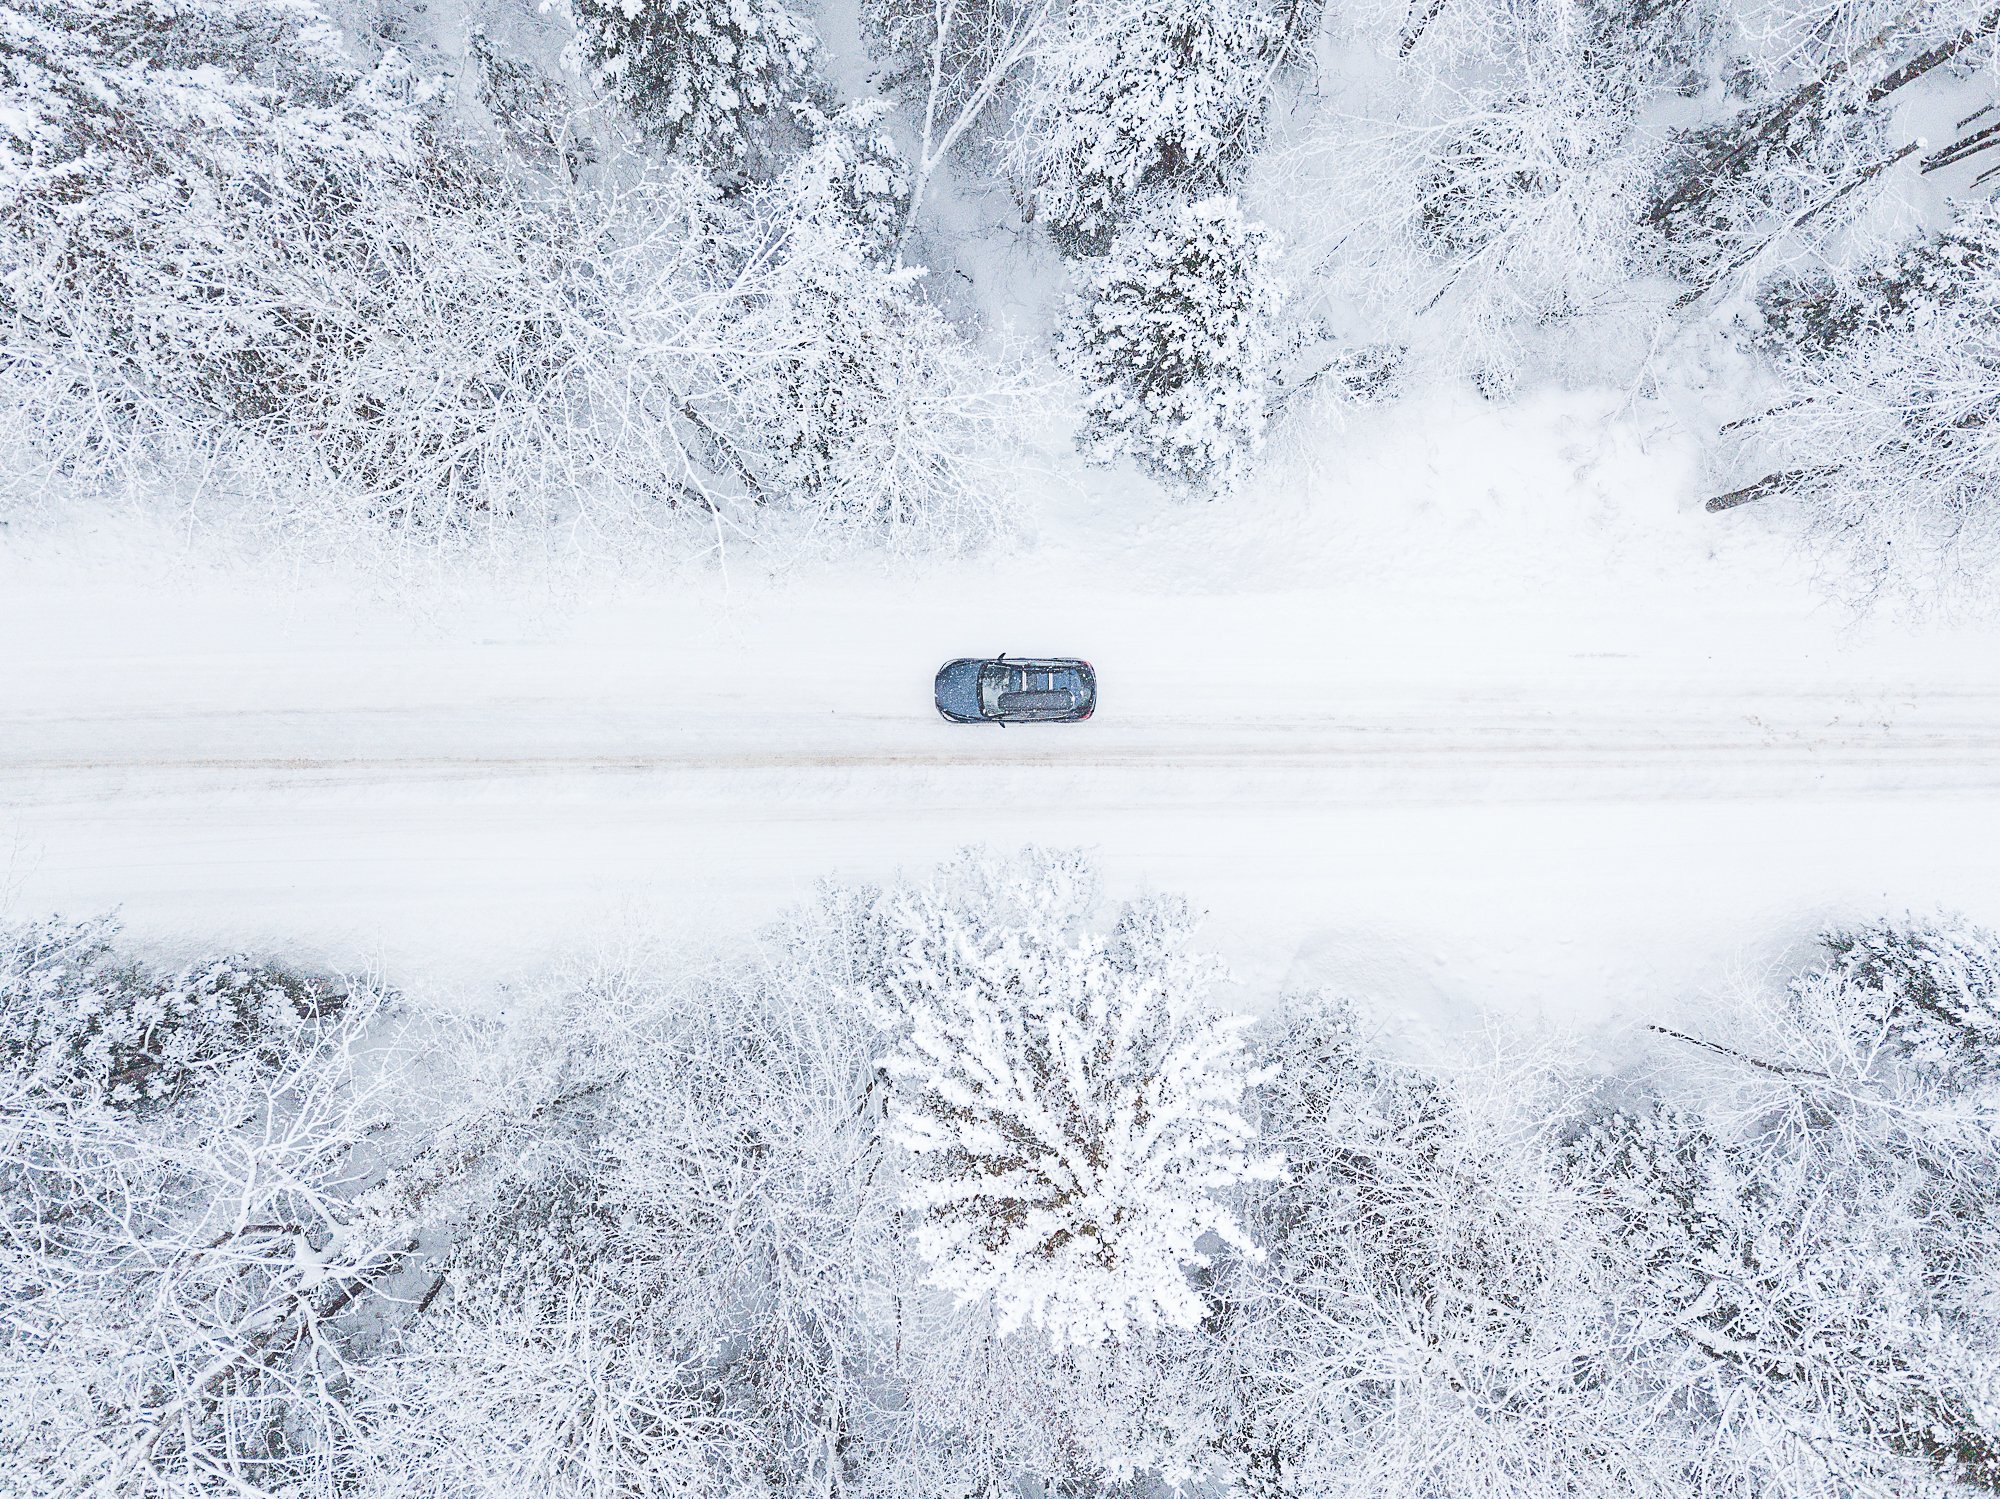 A Mazda 3 drives along a snow-covered back road in winter_.jpg